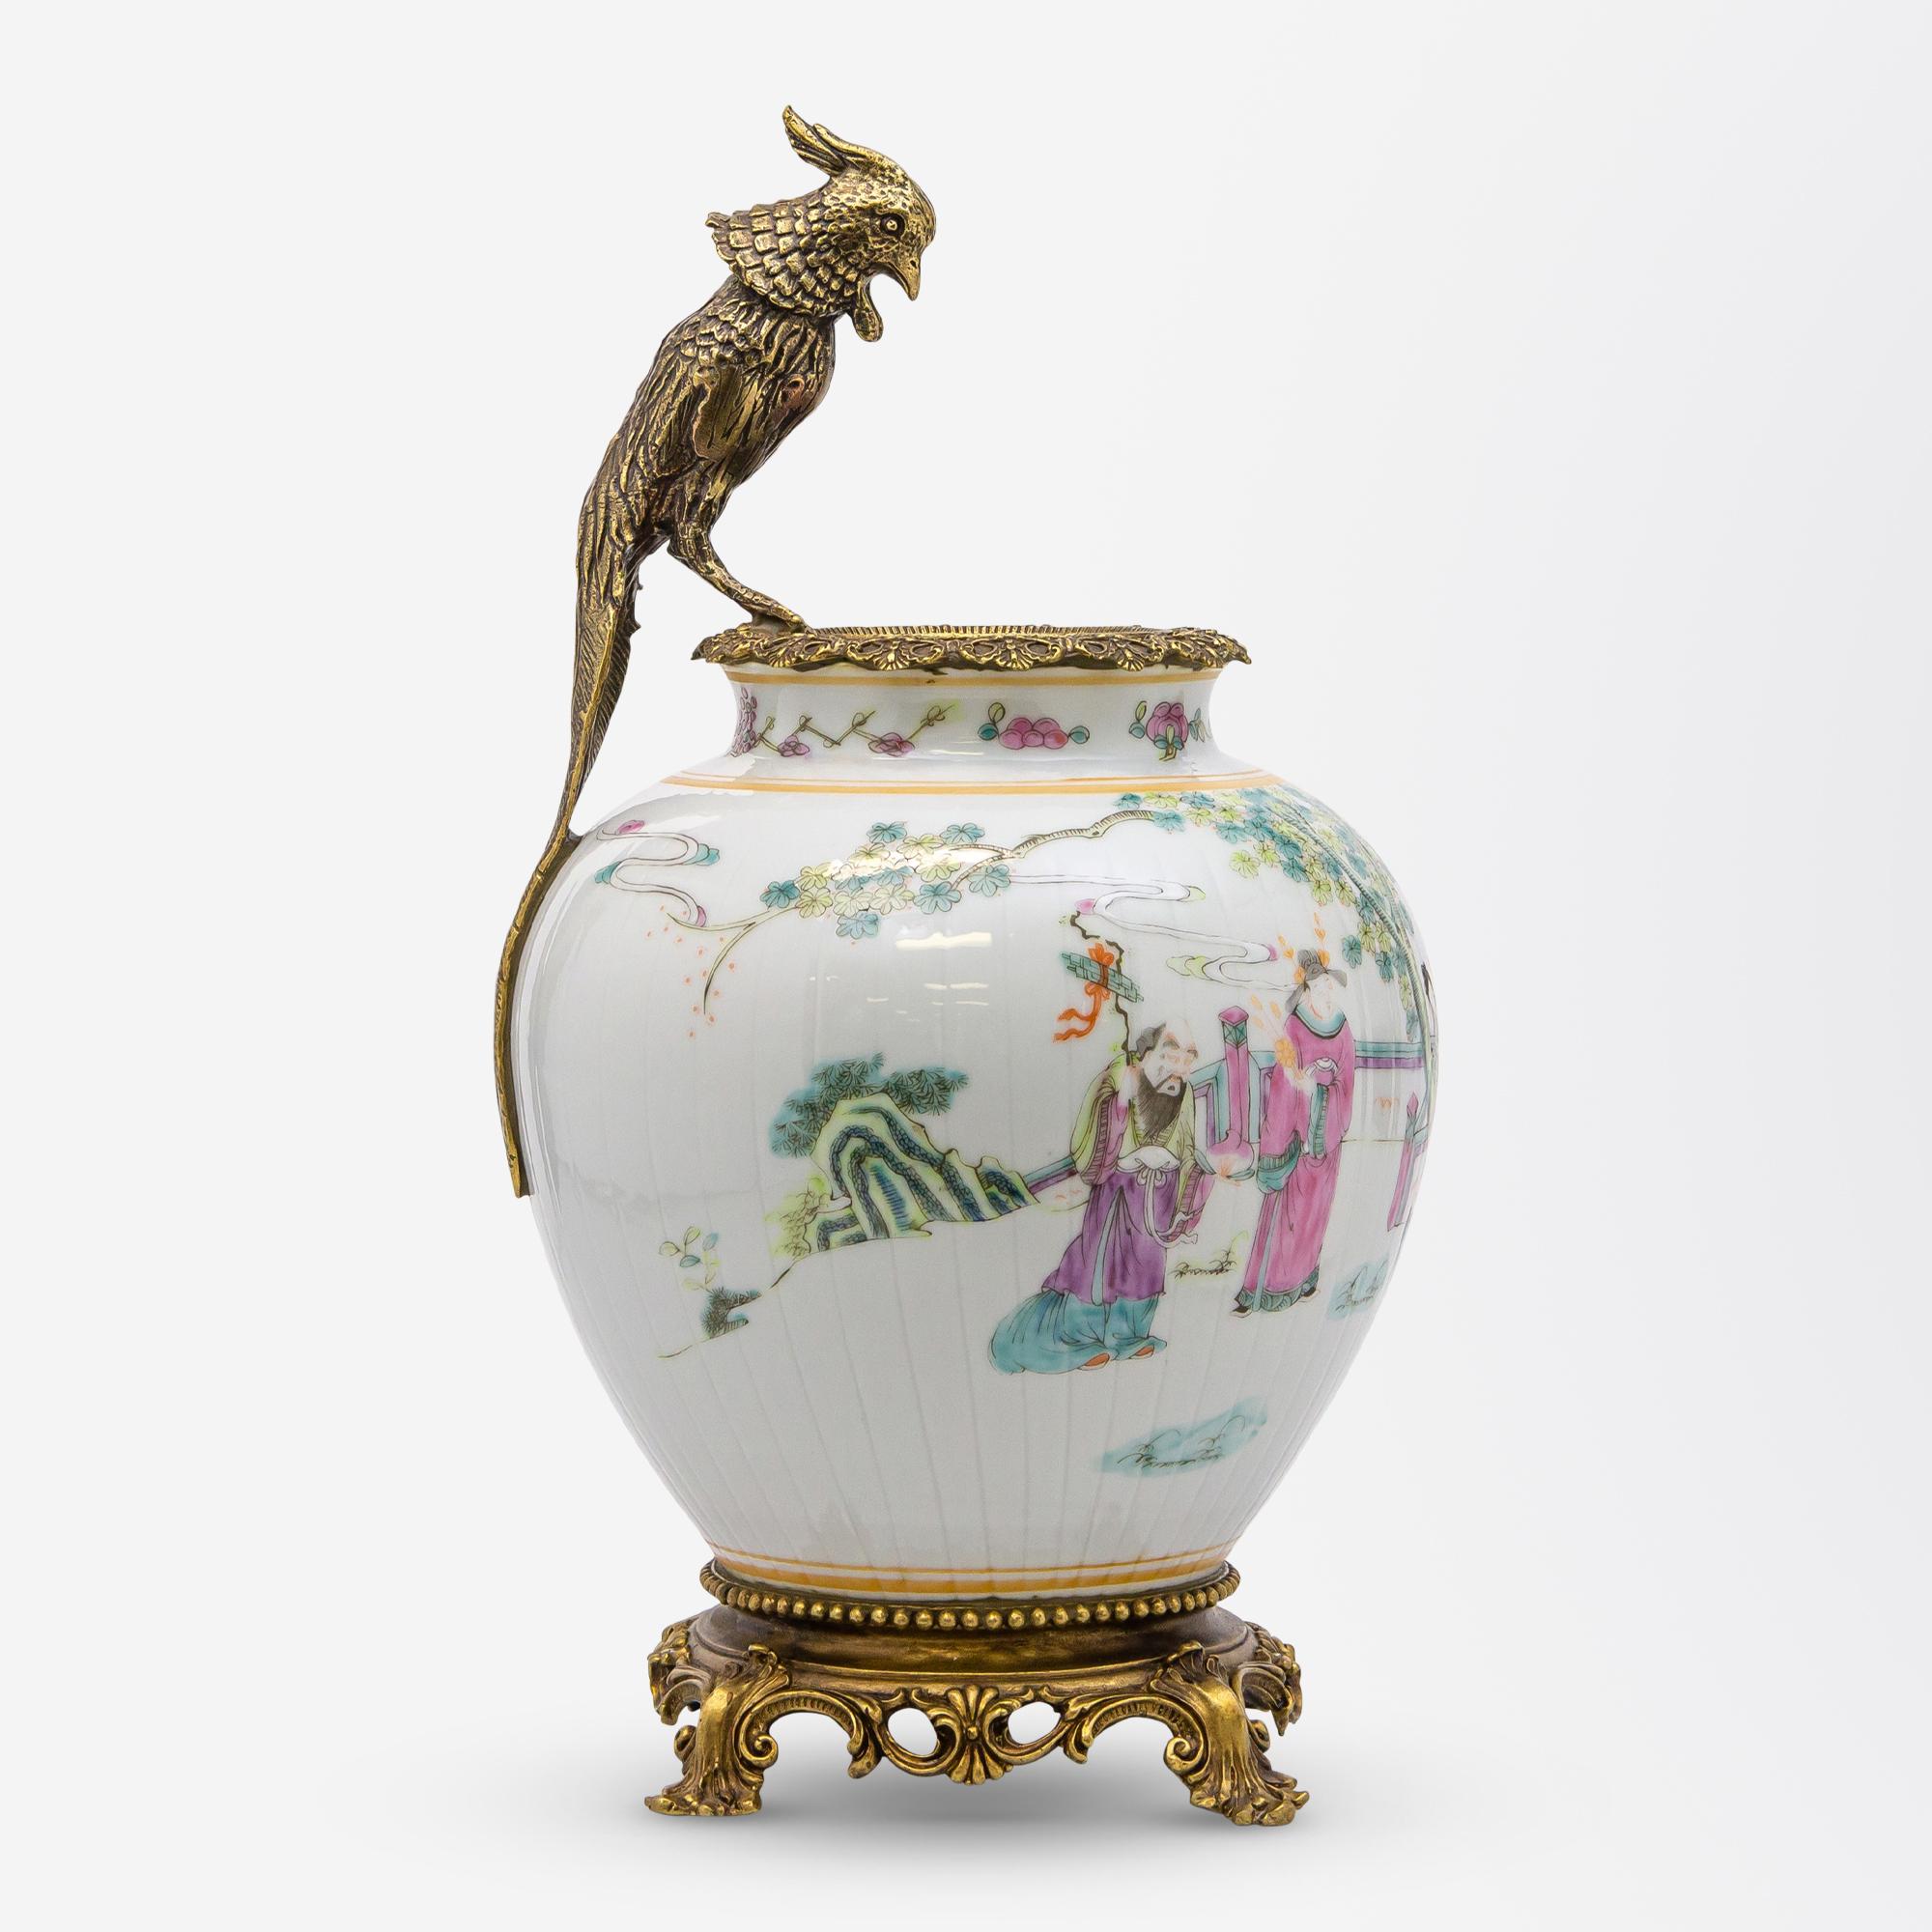 This exquisite polychrome Chinese vase has been mounted with bronze mounts and has previously been in two private collections. The vase dates to the reign of Chinese Emperor Tongzhi (1856-1875) who was a part of the lengthy Qing Dynasty and had a